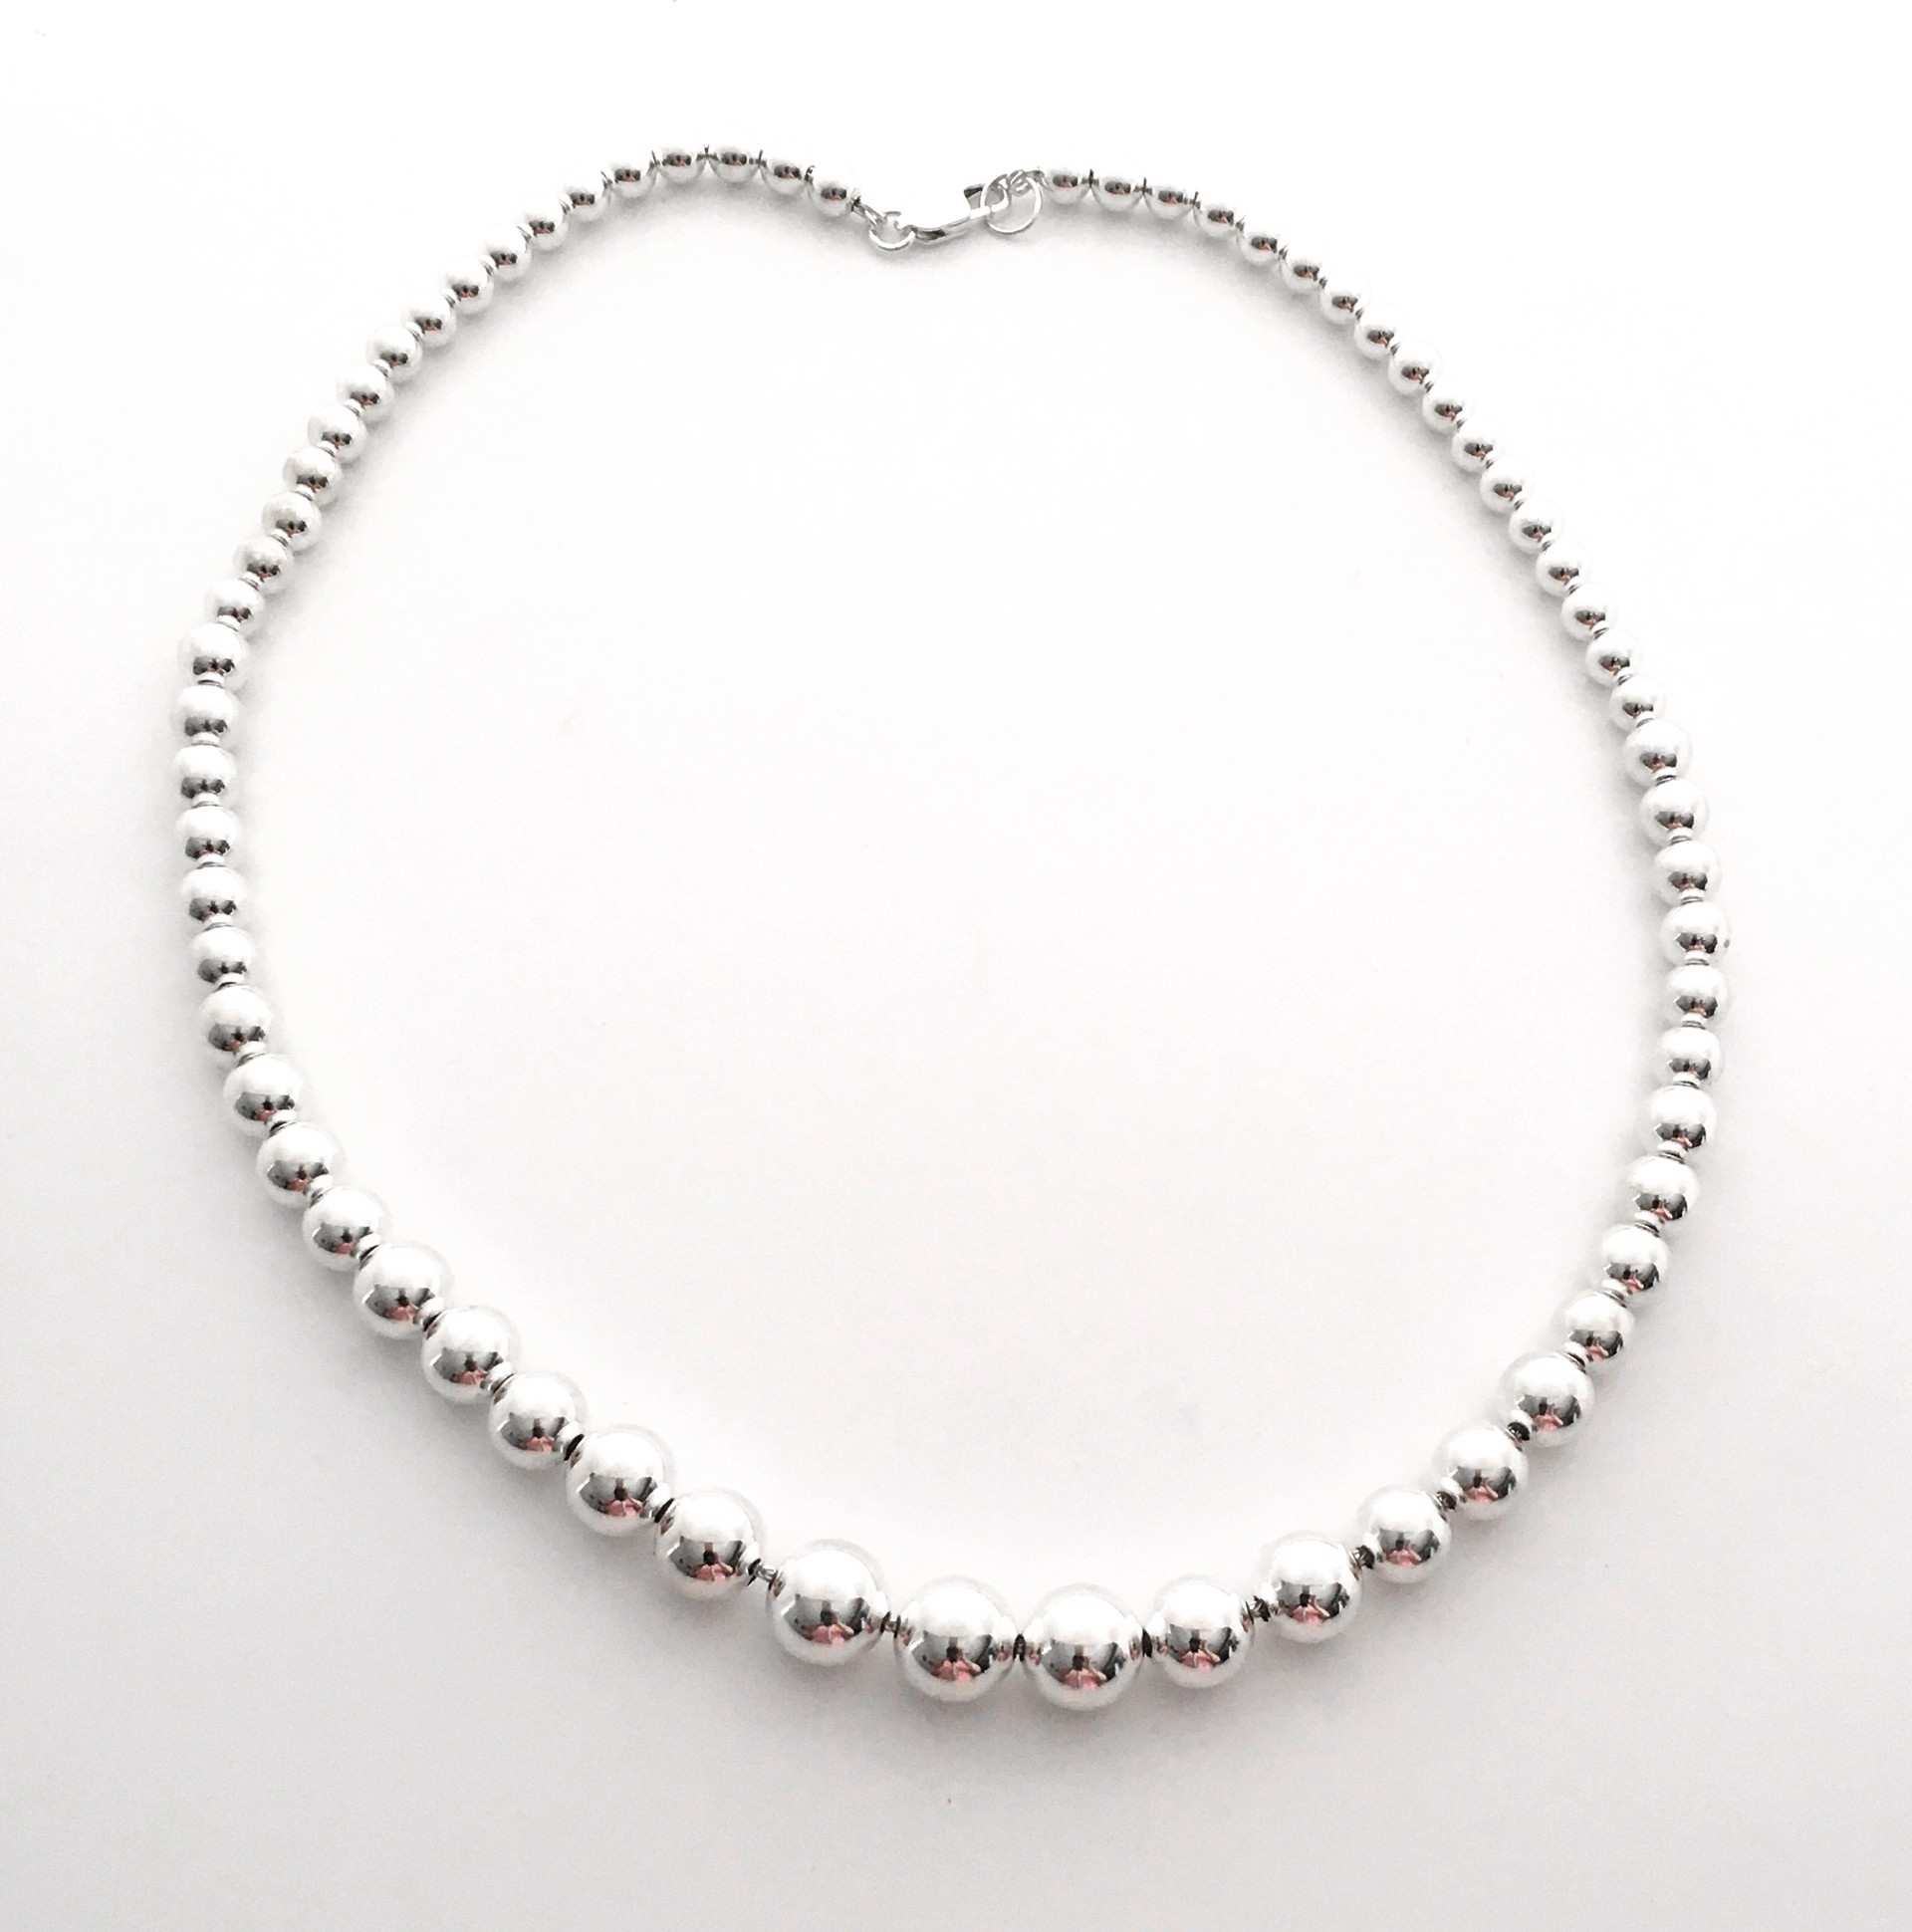  20" Graduated Sterling Silver Beaded Necklace  - 6 -11 mm by Suzanne Woodworth